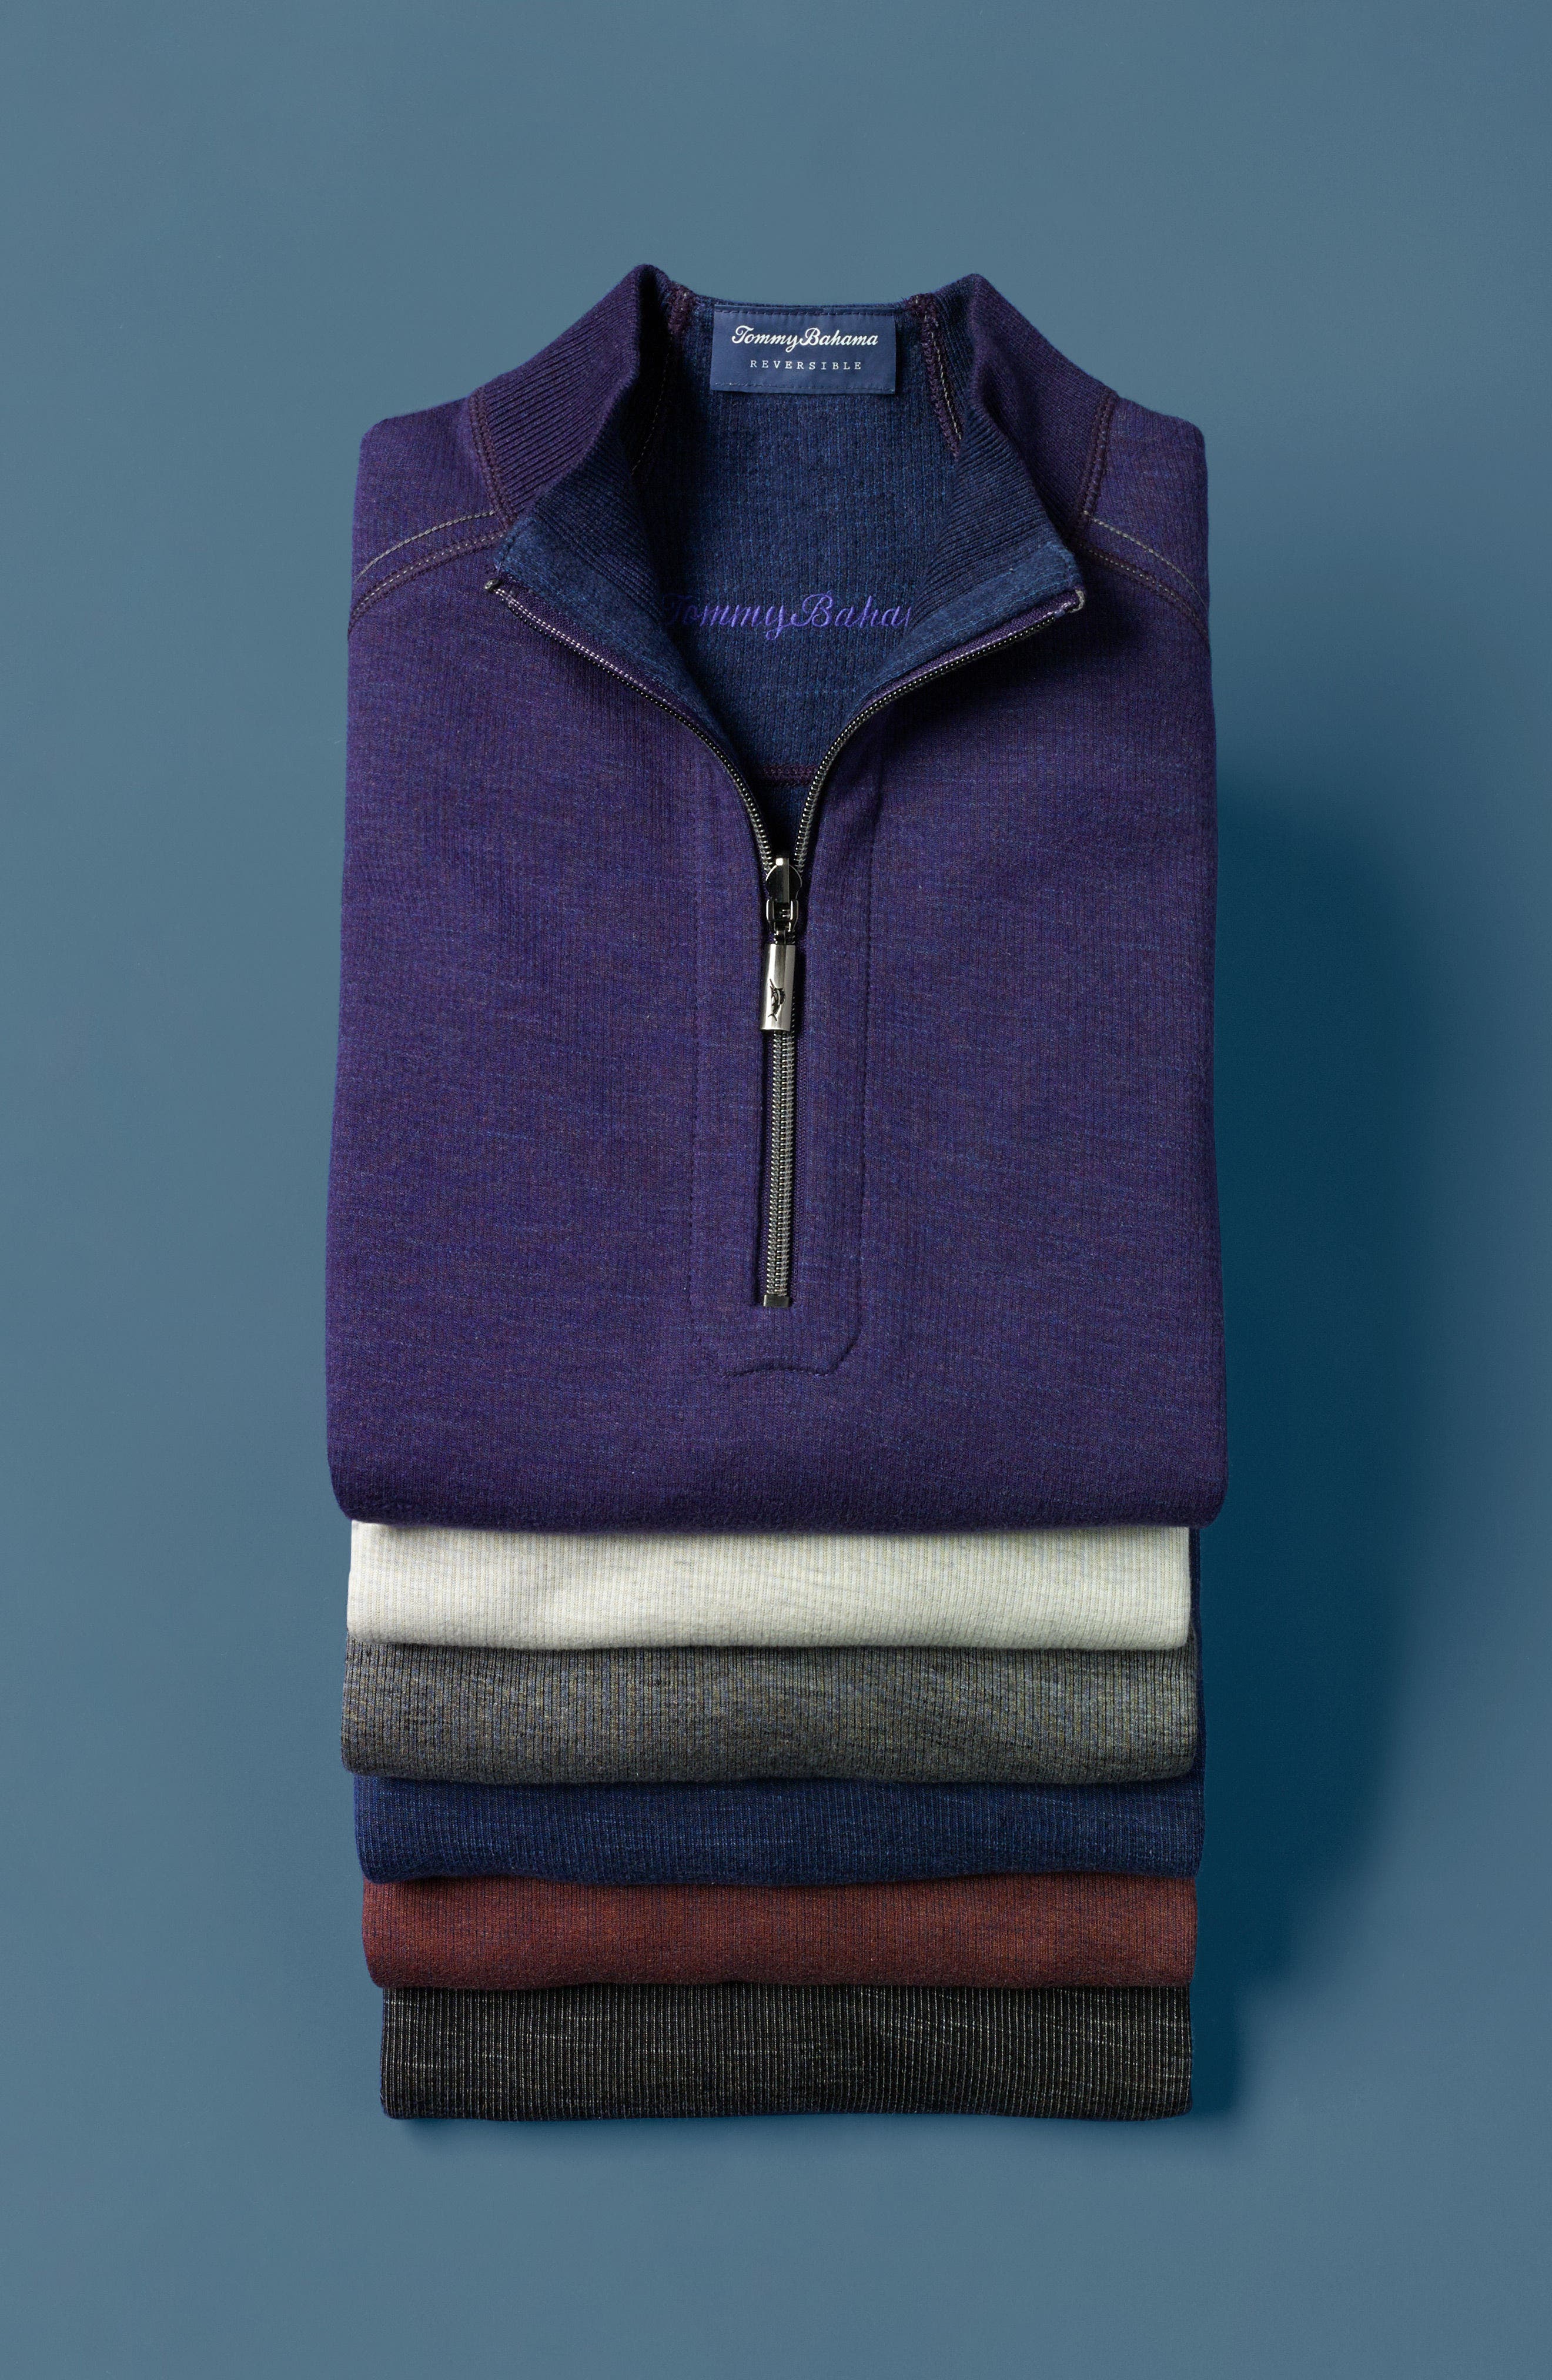 tommy bahama quarter zip pullover